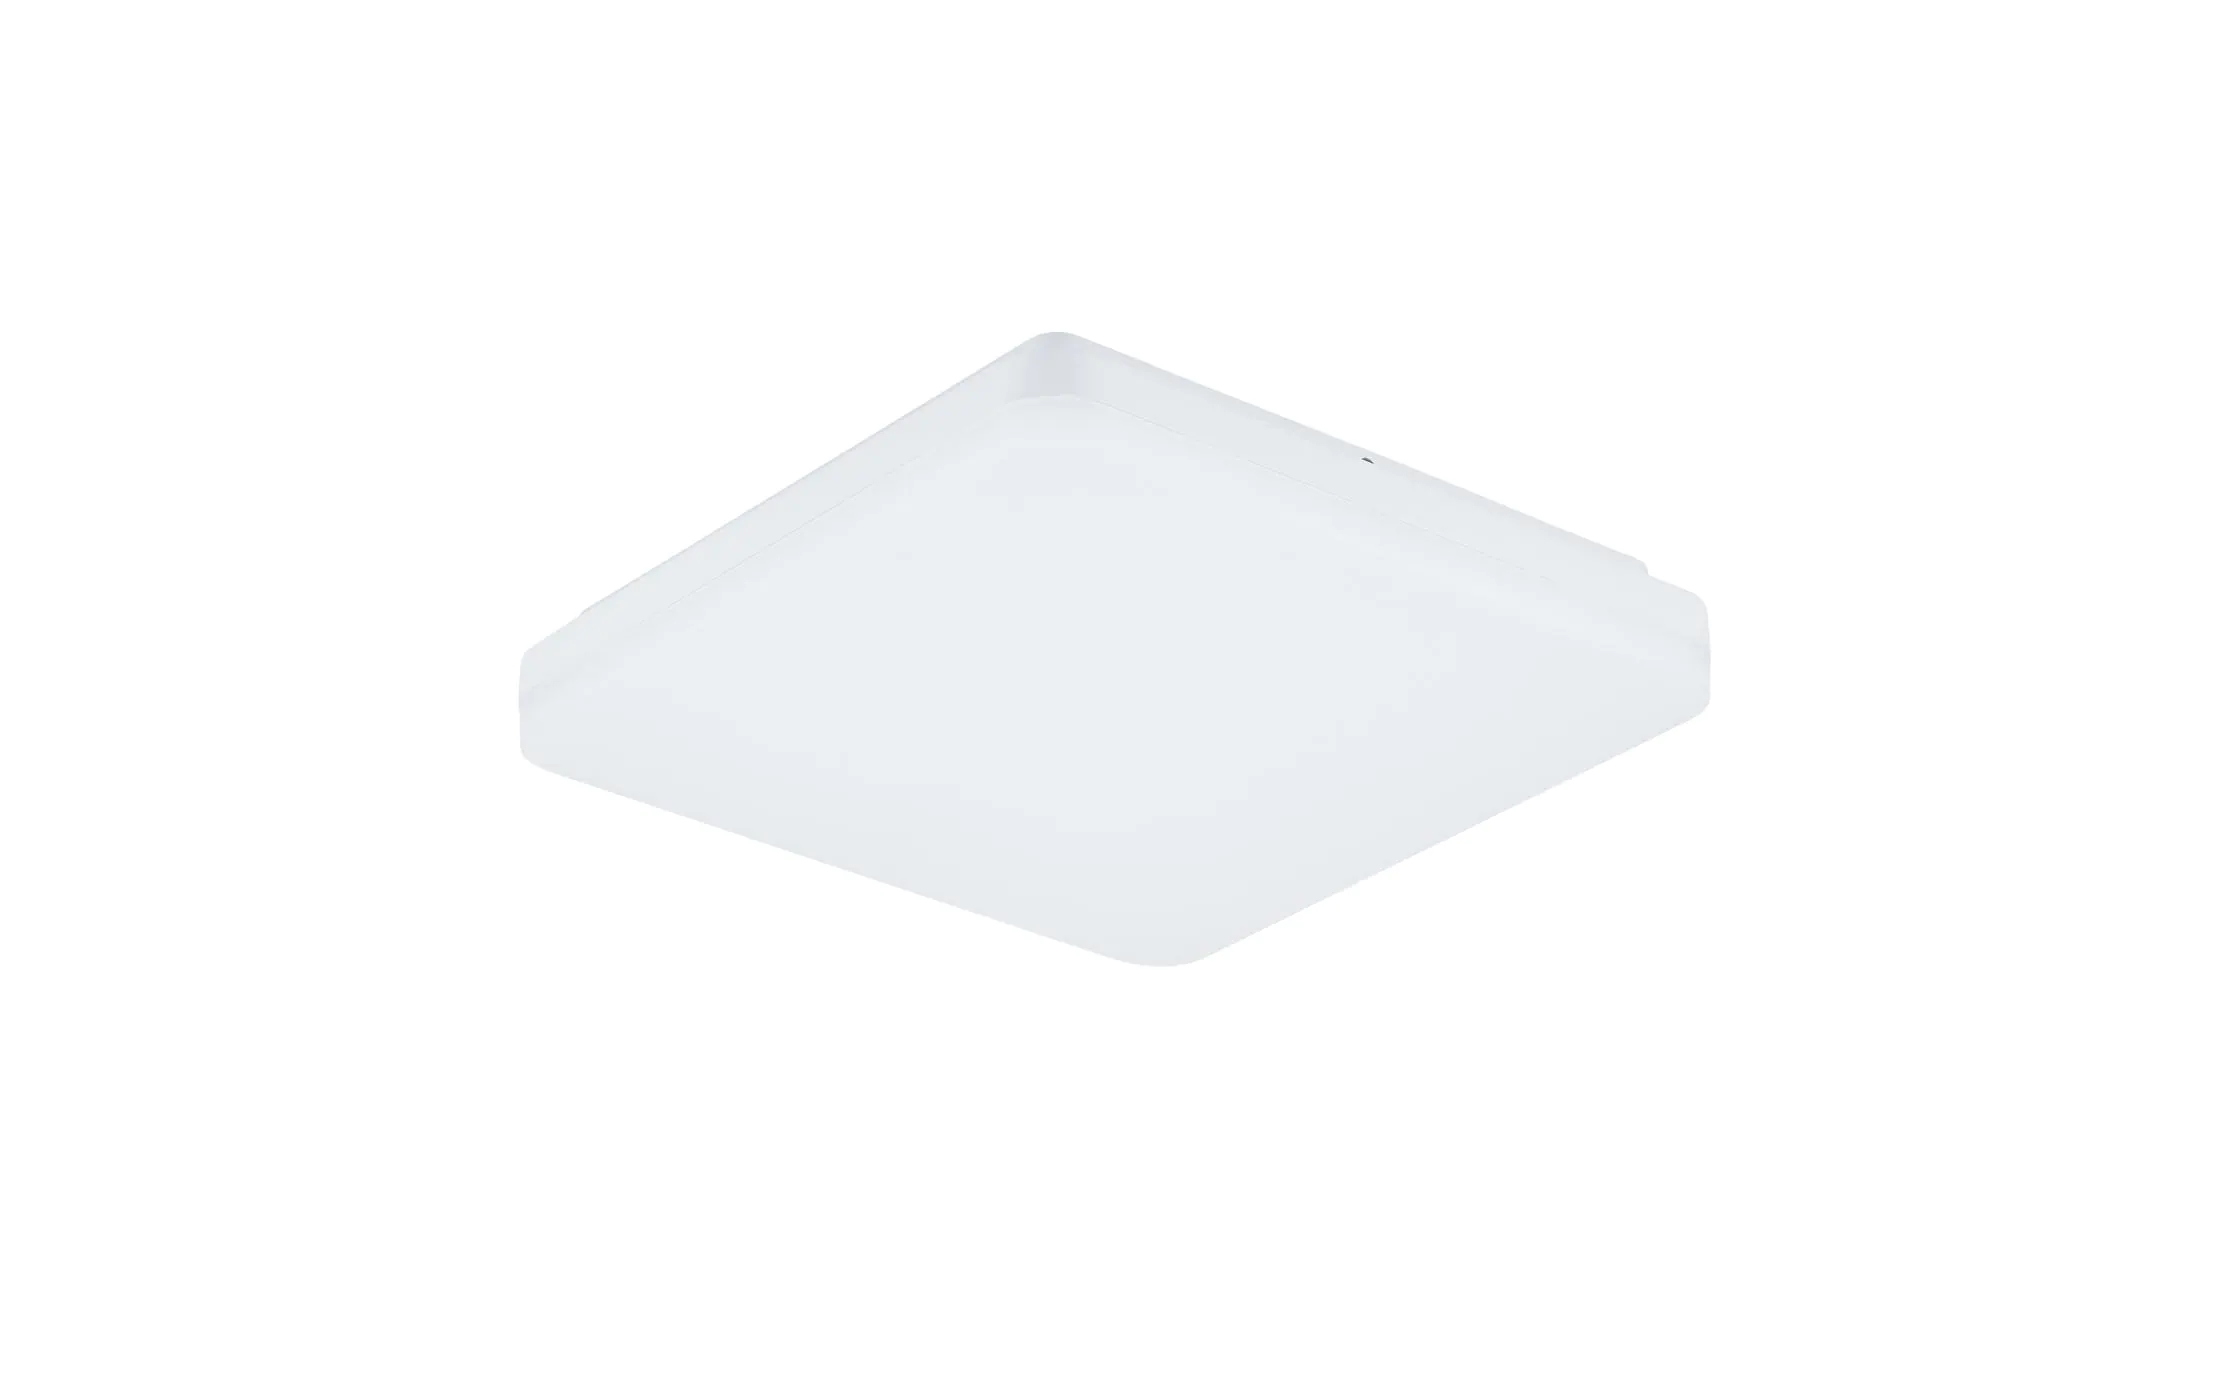 Anbauleuchte LED SLICE SQUARE IV N weiss, 29/38W, 3000/4000K, IP20, NOT